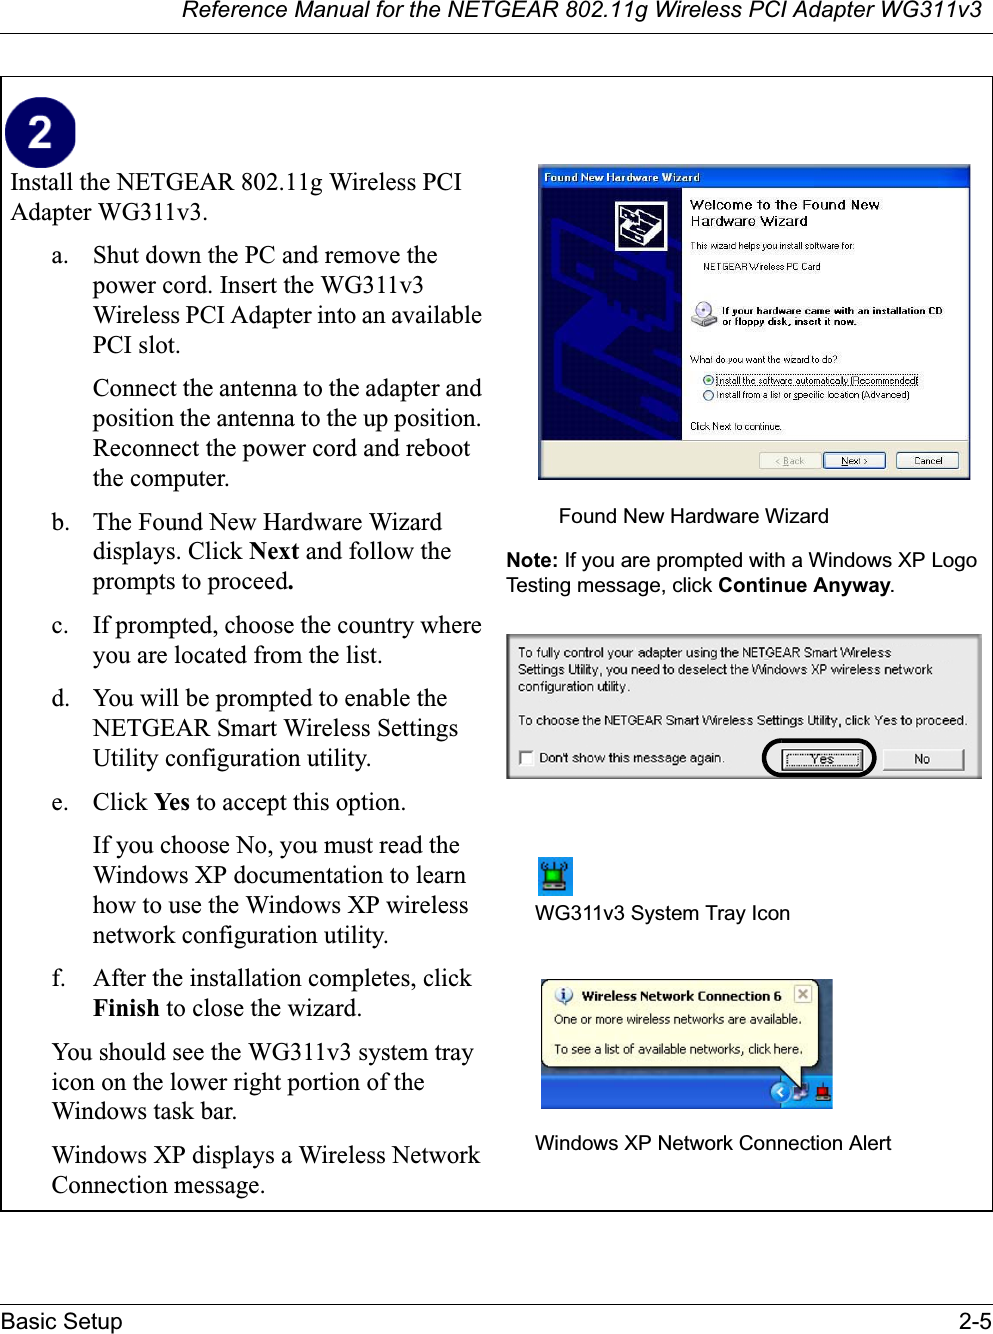 Reference Manual for the NETGEAR 802.11g Wireless PCI Adapter WG311v3Basic Setup 2-5Install the NETGEAR 802.11g Wireless PCI Adapter WG311v3. a. Shut down the PC and remove the power cord. Insert the WG311v3Wireless PCI Adapter into an available PCI slot.Connect the antenna to the adapter and position the antenna to the up position. Reconnect the power cord and reboot the computer.b. The Found New Hardware Wizard displays. Click Next and follow the prompts to proceed.c. If prompted, choose the country where you are located from the list.d. You will be prompted to enable the NETGEAR Smart Wireless Settings Utility configuration utility. e. Click Ye s  to accept this option. If you choose No, you must read the Windows XP documentation to learn how to use the Windows XP wireless network configuration utility.f. After the installation completes, click Finish to close the wizard.You should see the WG311v3 system tray icon on the lower right portion of the Windows task bar.Windows XP displays a Wireless Network Connection message.Note: If you are prompted with a Windows XP Logo Testing message, click Continue Anyway.WG311v3 System Tray IconWindows XP Network Connection AlertFound New Hardware Wizard